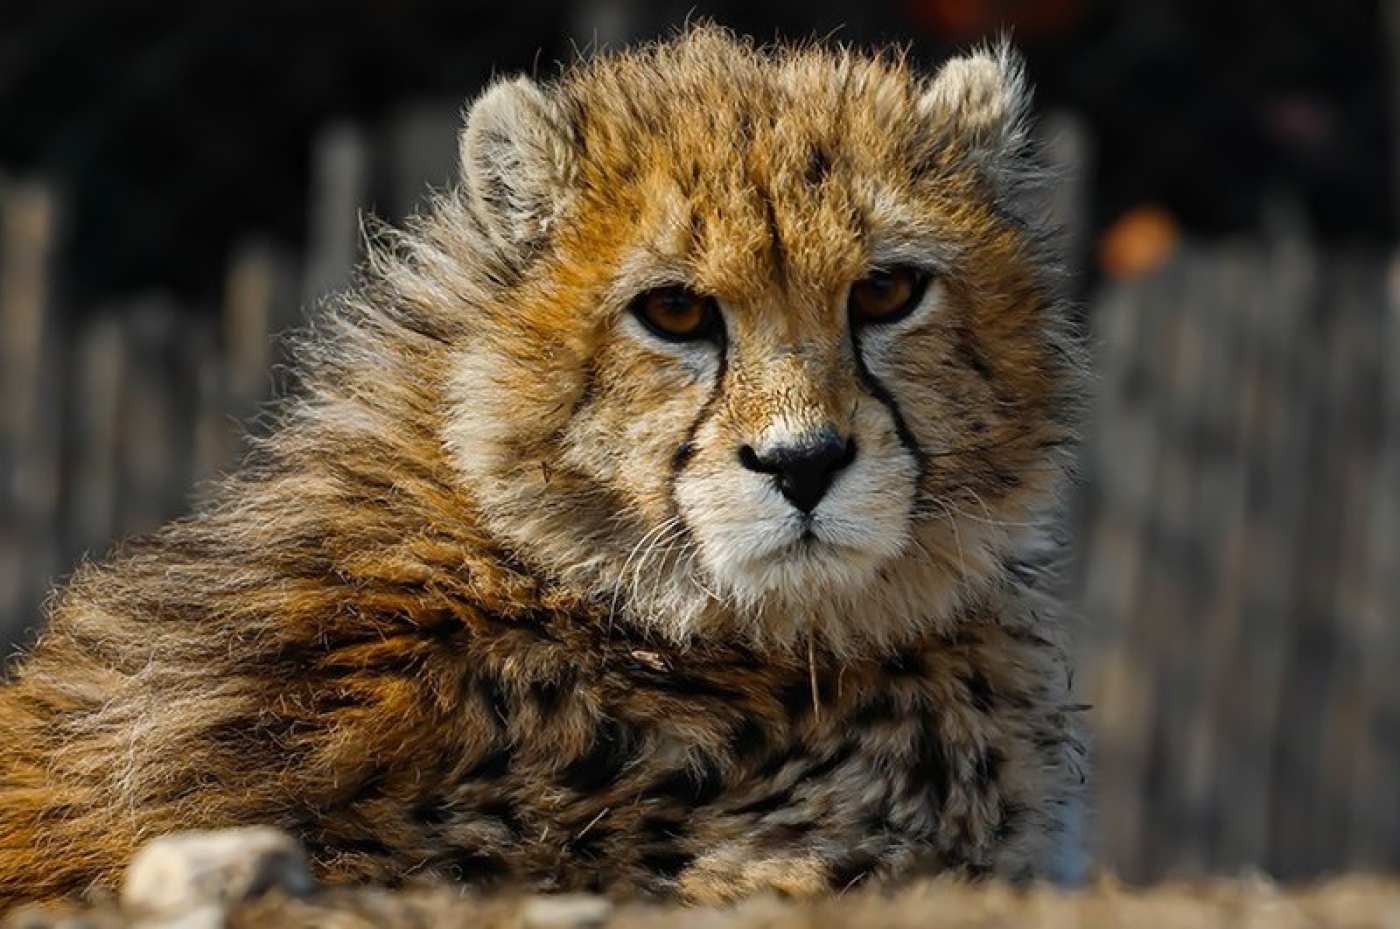 Nine-month old photo from state news agency of cheetah Pirouz (Fars)